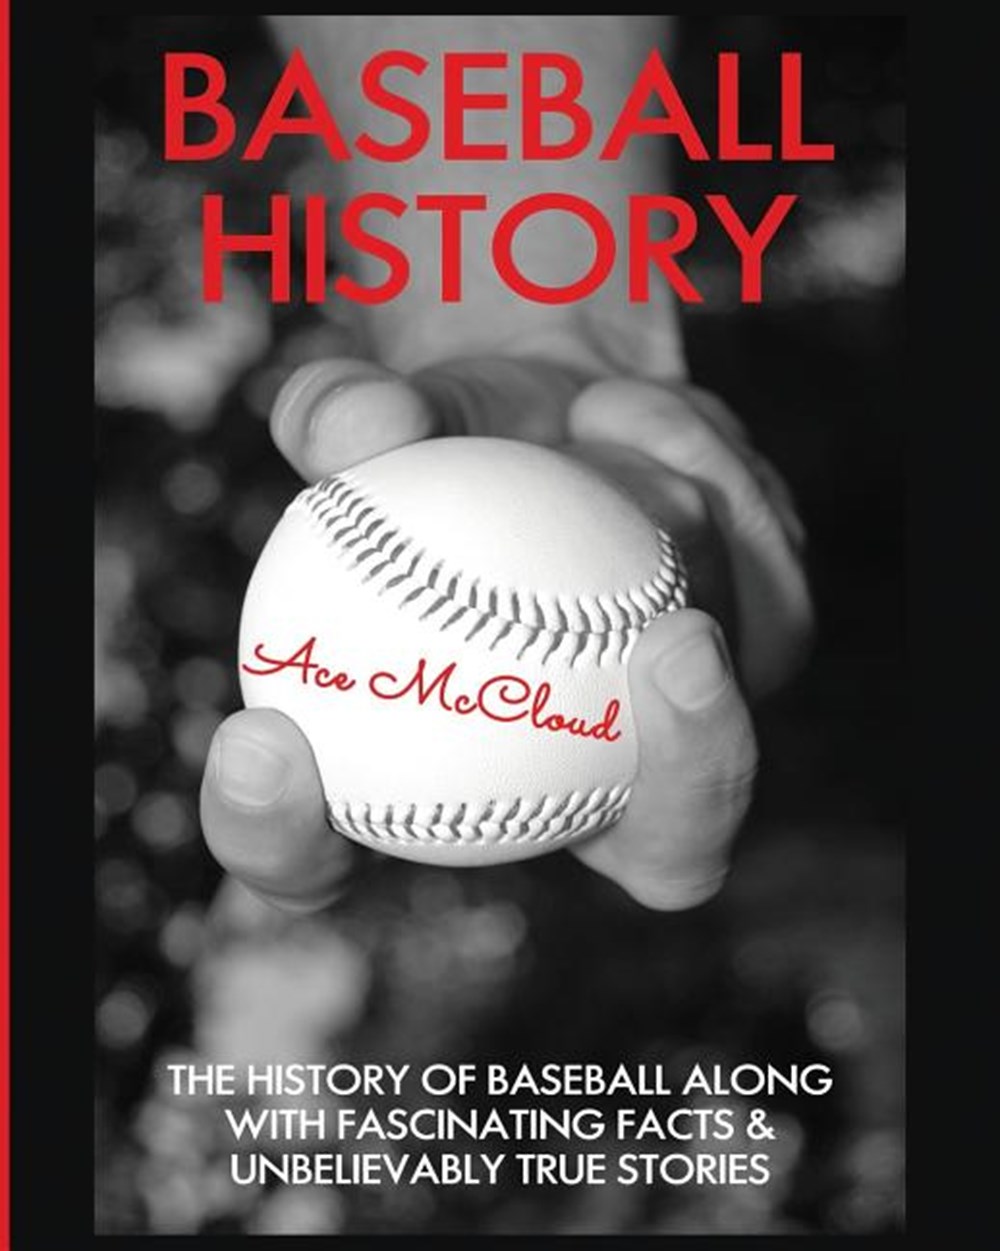 Baseball History The History of Baseball Along With Fascinating Facts & Unbelievably True Stories